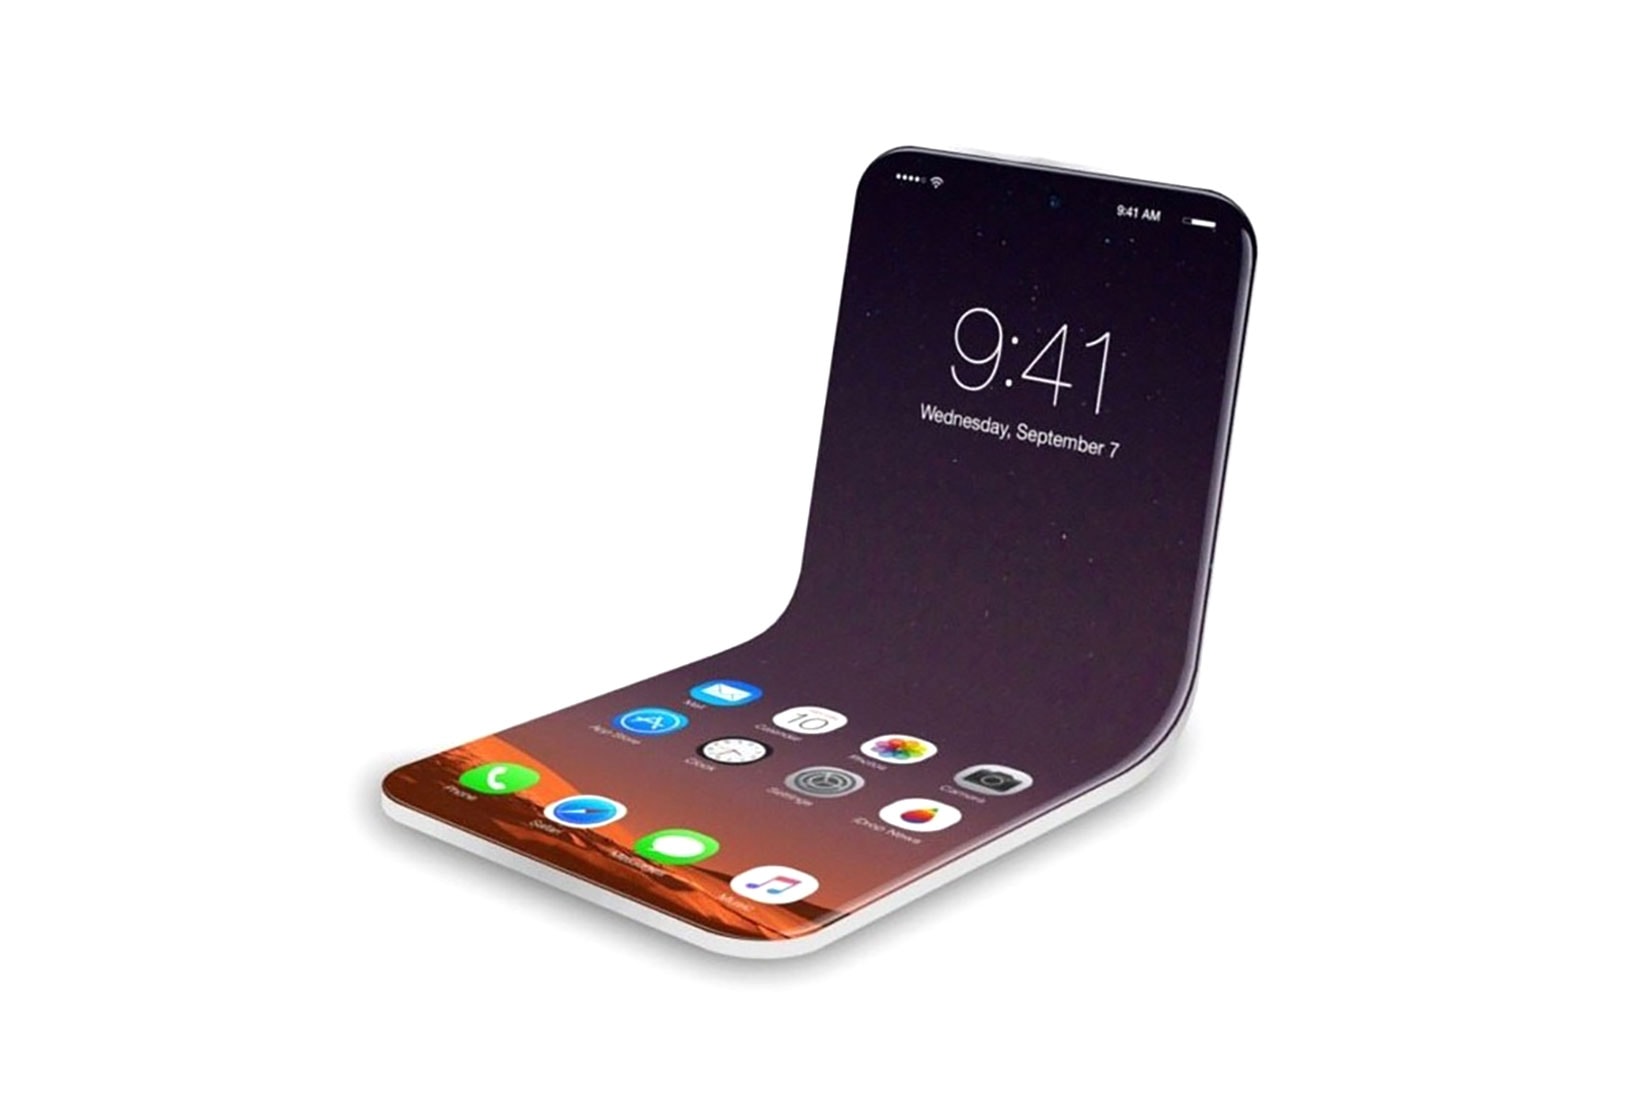 apple foldable iphone dual screen prototypes durability test